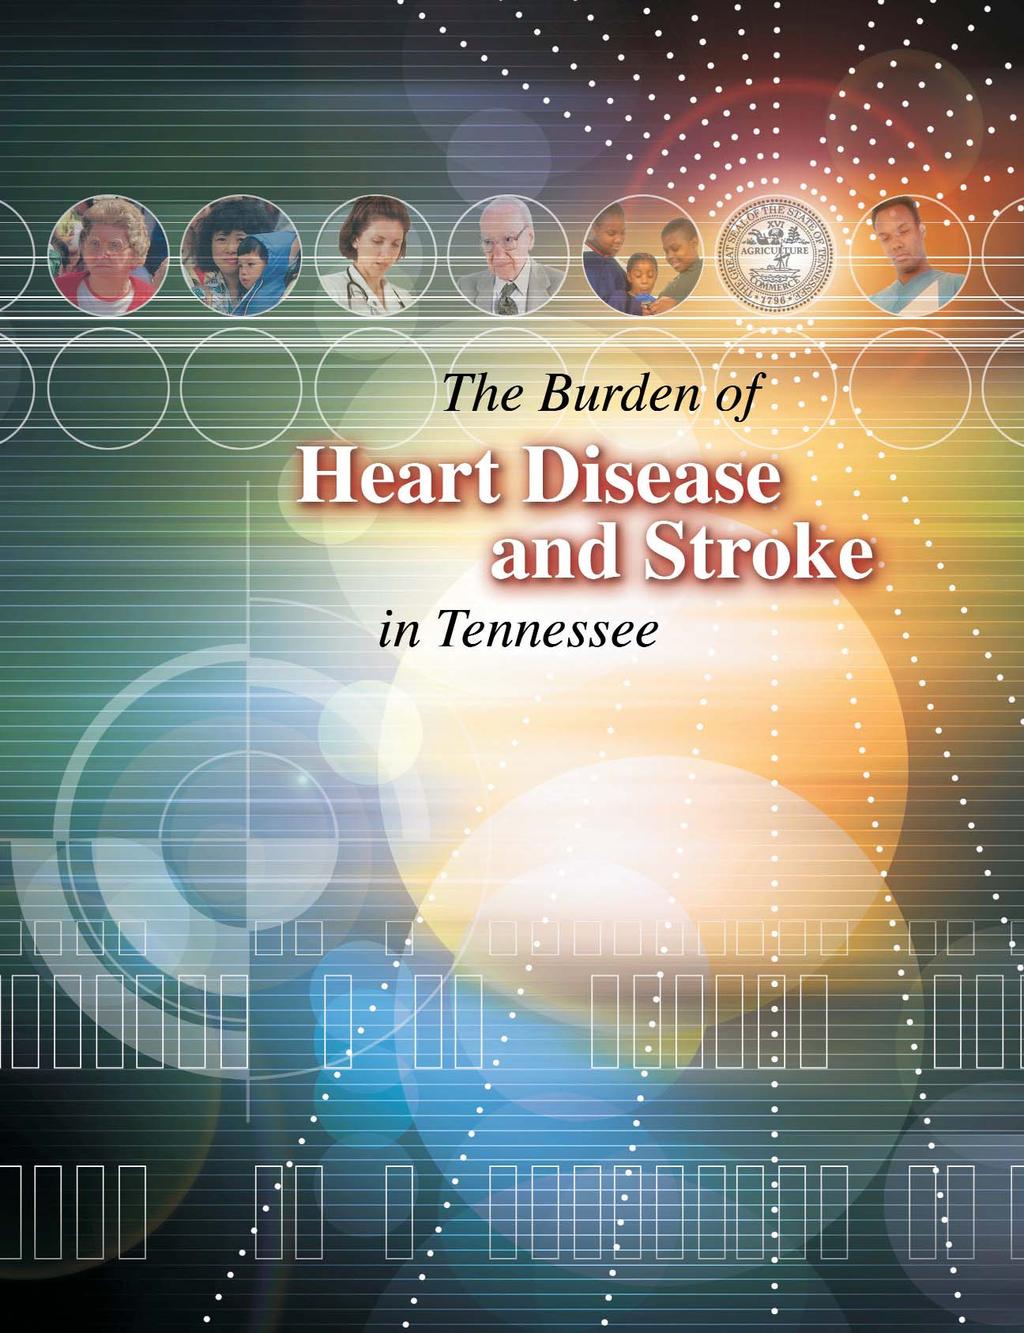 Tennessee Department of Health in collaboration with Tennessee